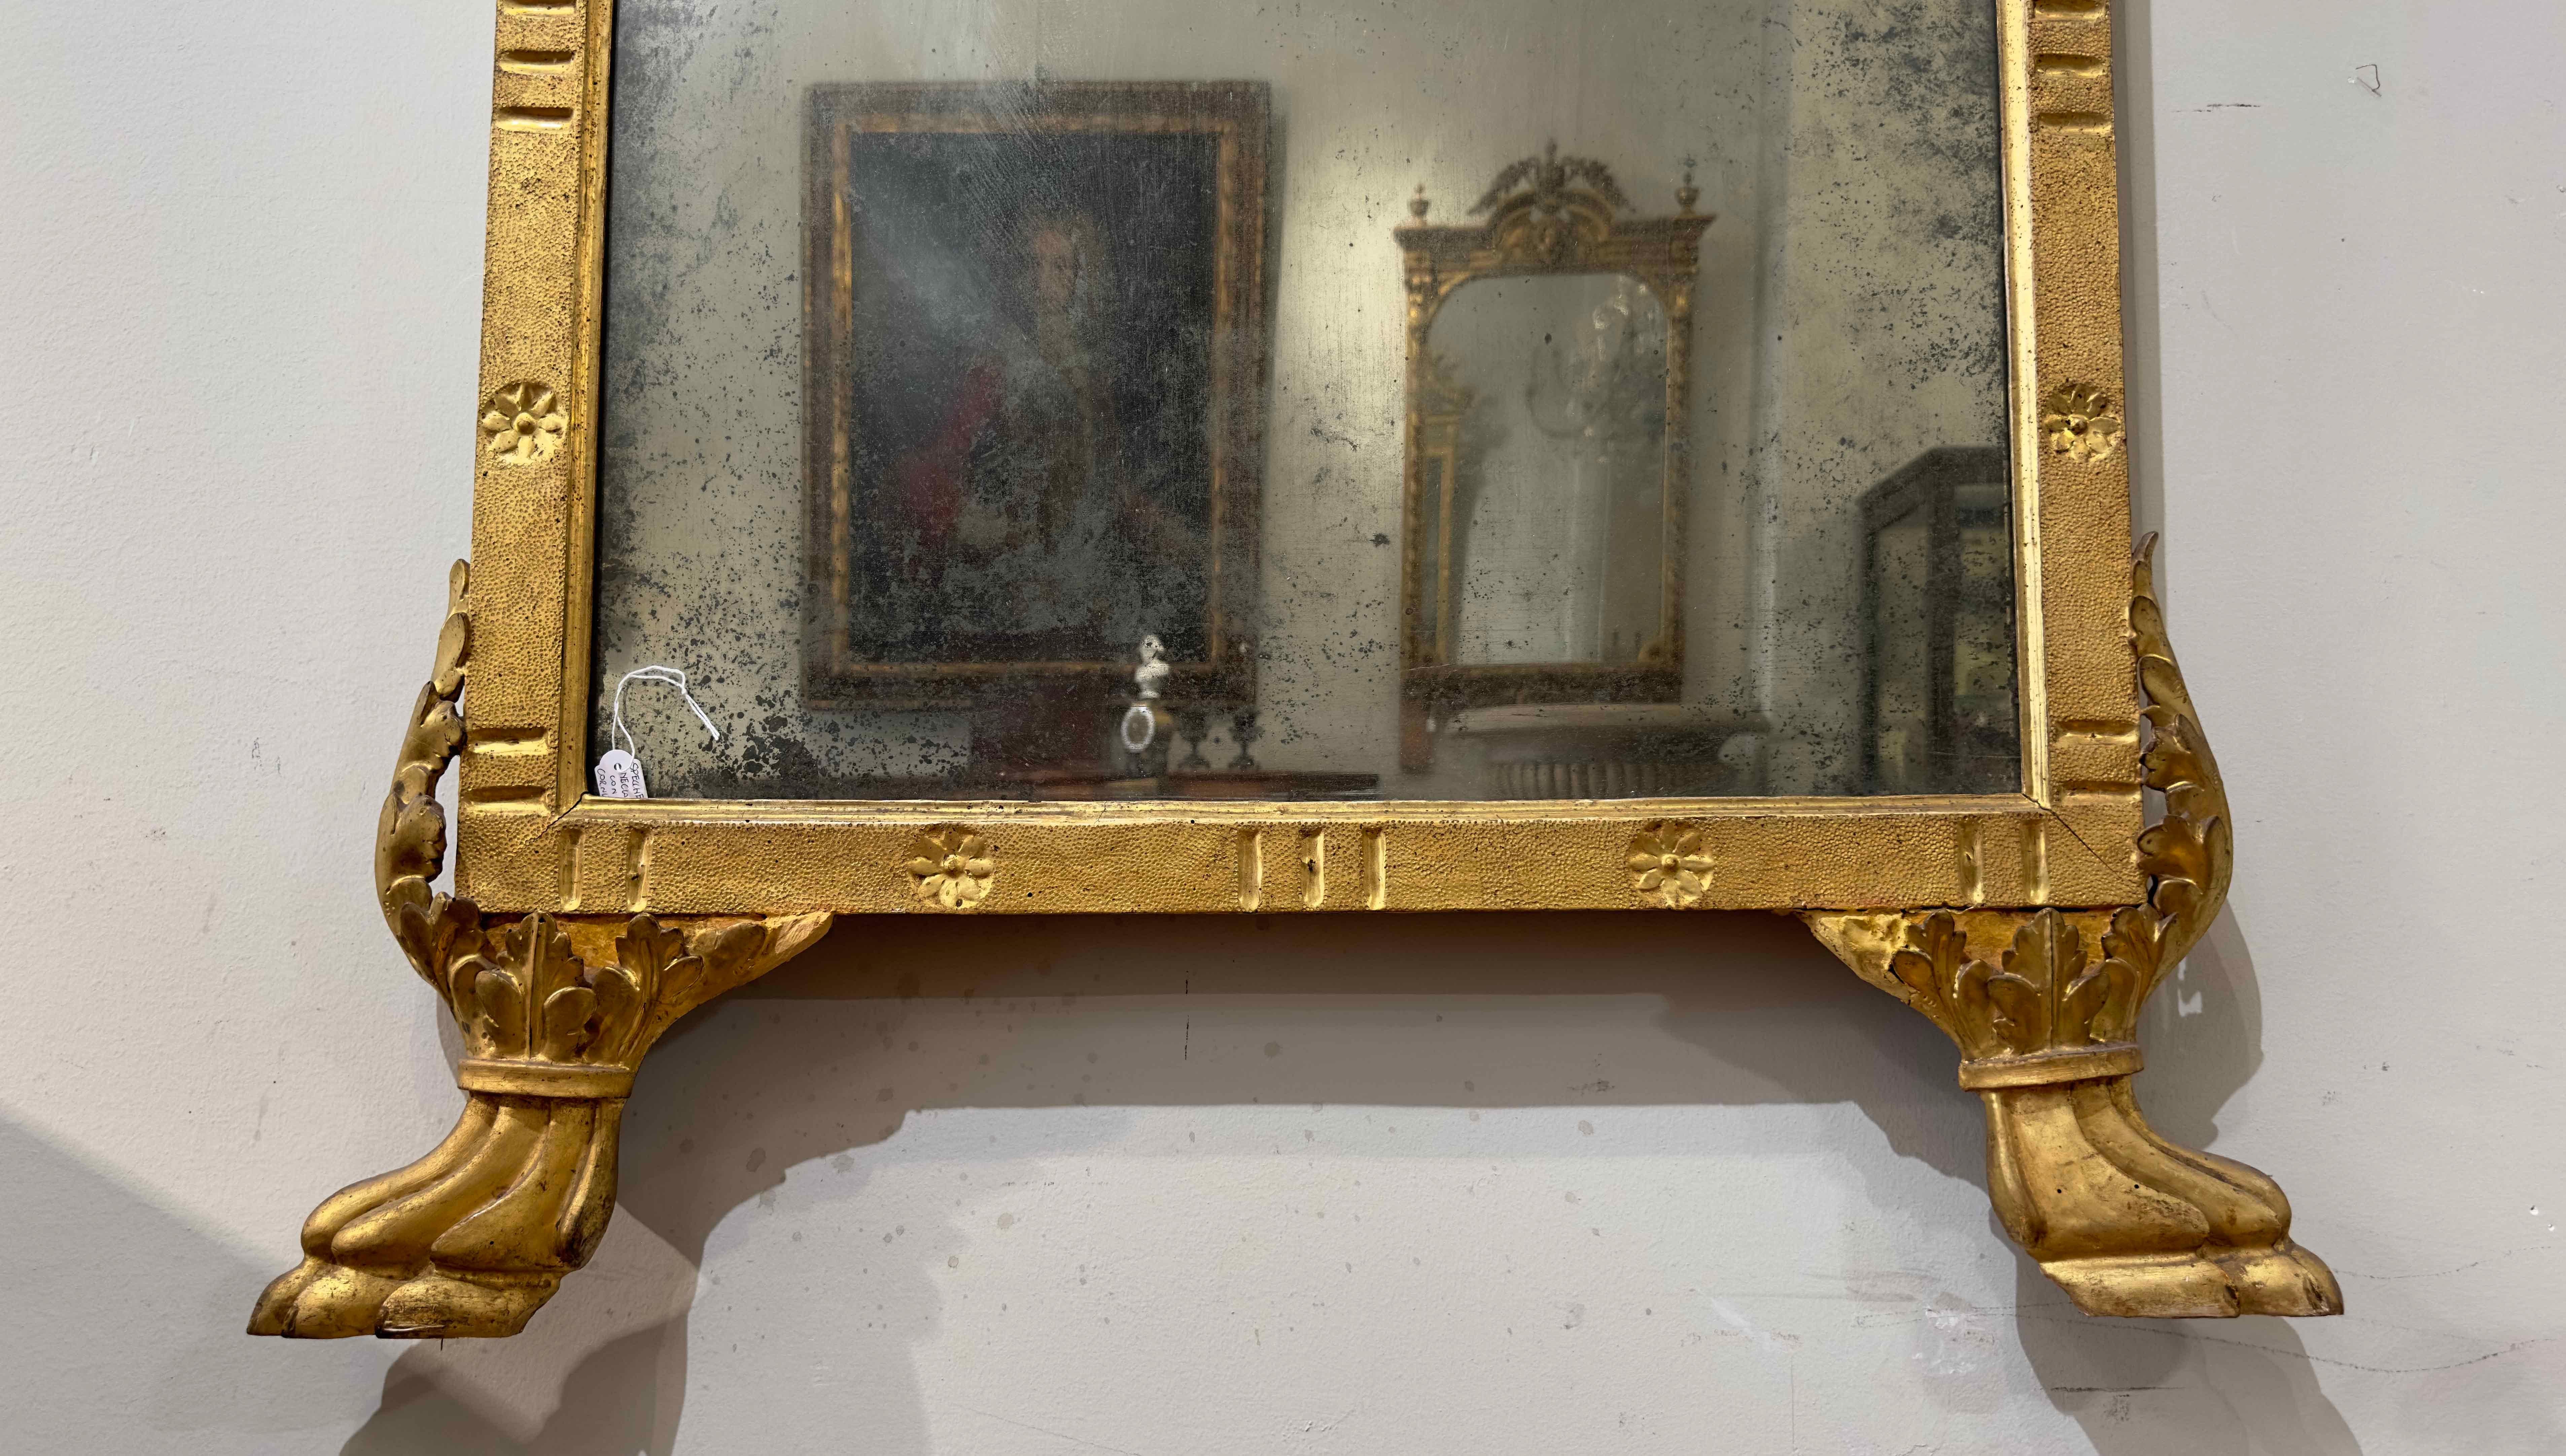 END OF THE 18th CENTURY NEOCLASSICAL MIRROR WITH CORNUCOPIAS AND OLIVE BRANCHES  For Sale 1